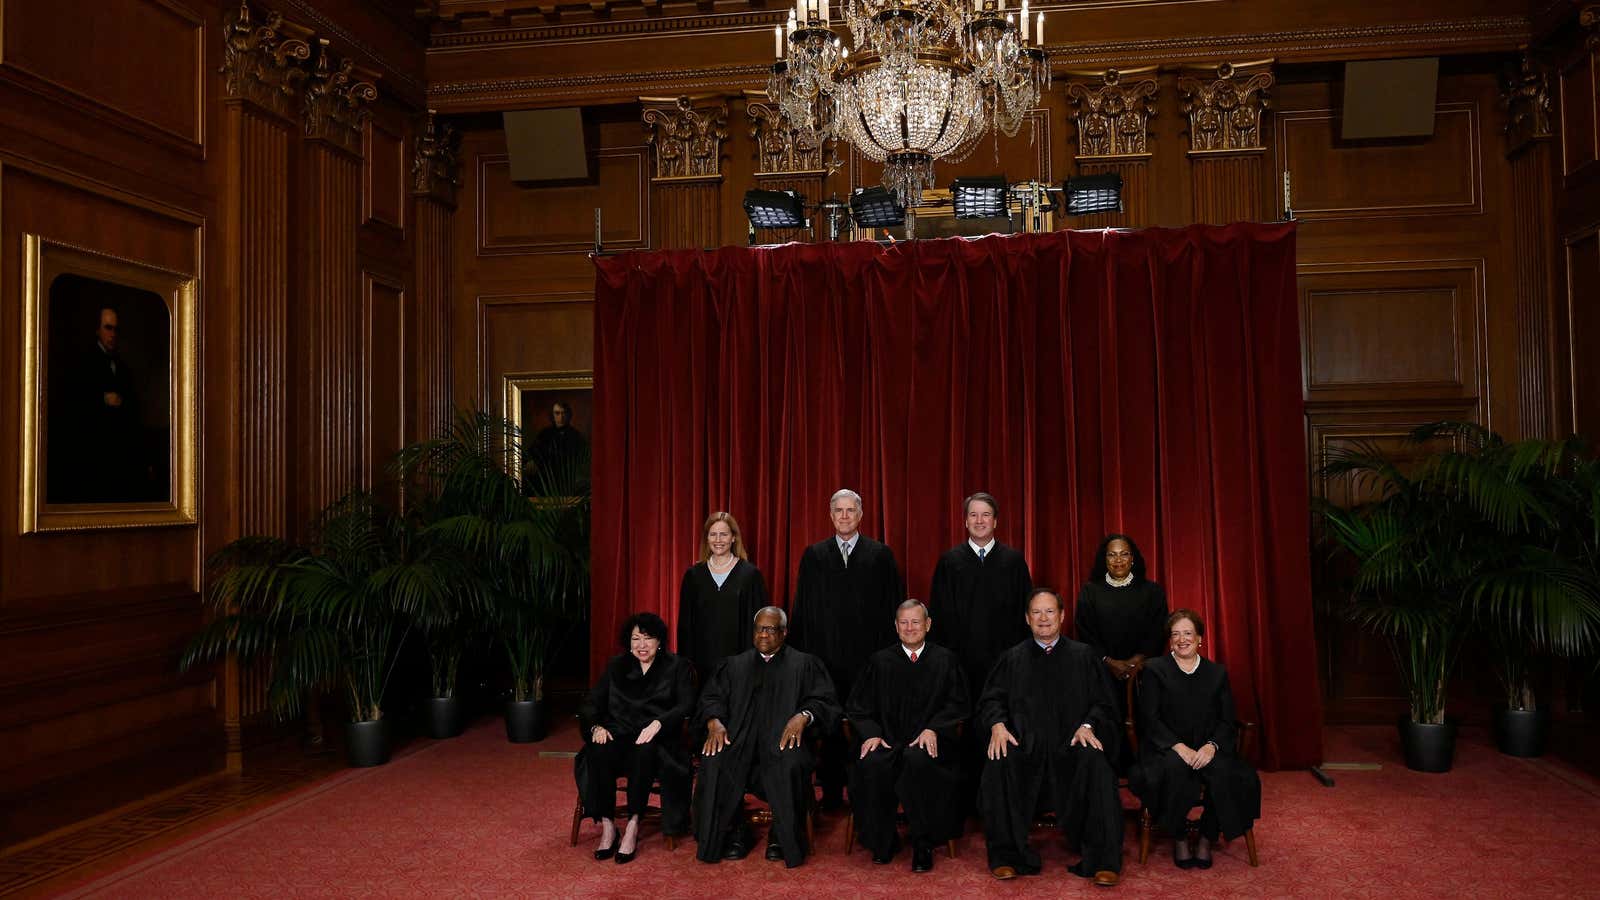 It&#39;s the most diverse US Supreme Court ever, not that they&#39;re counting.